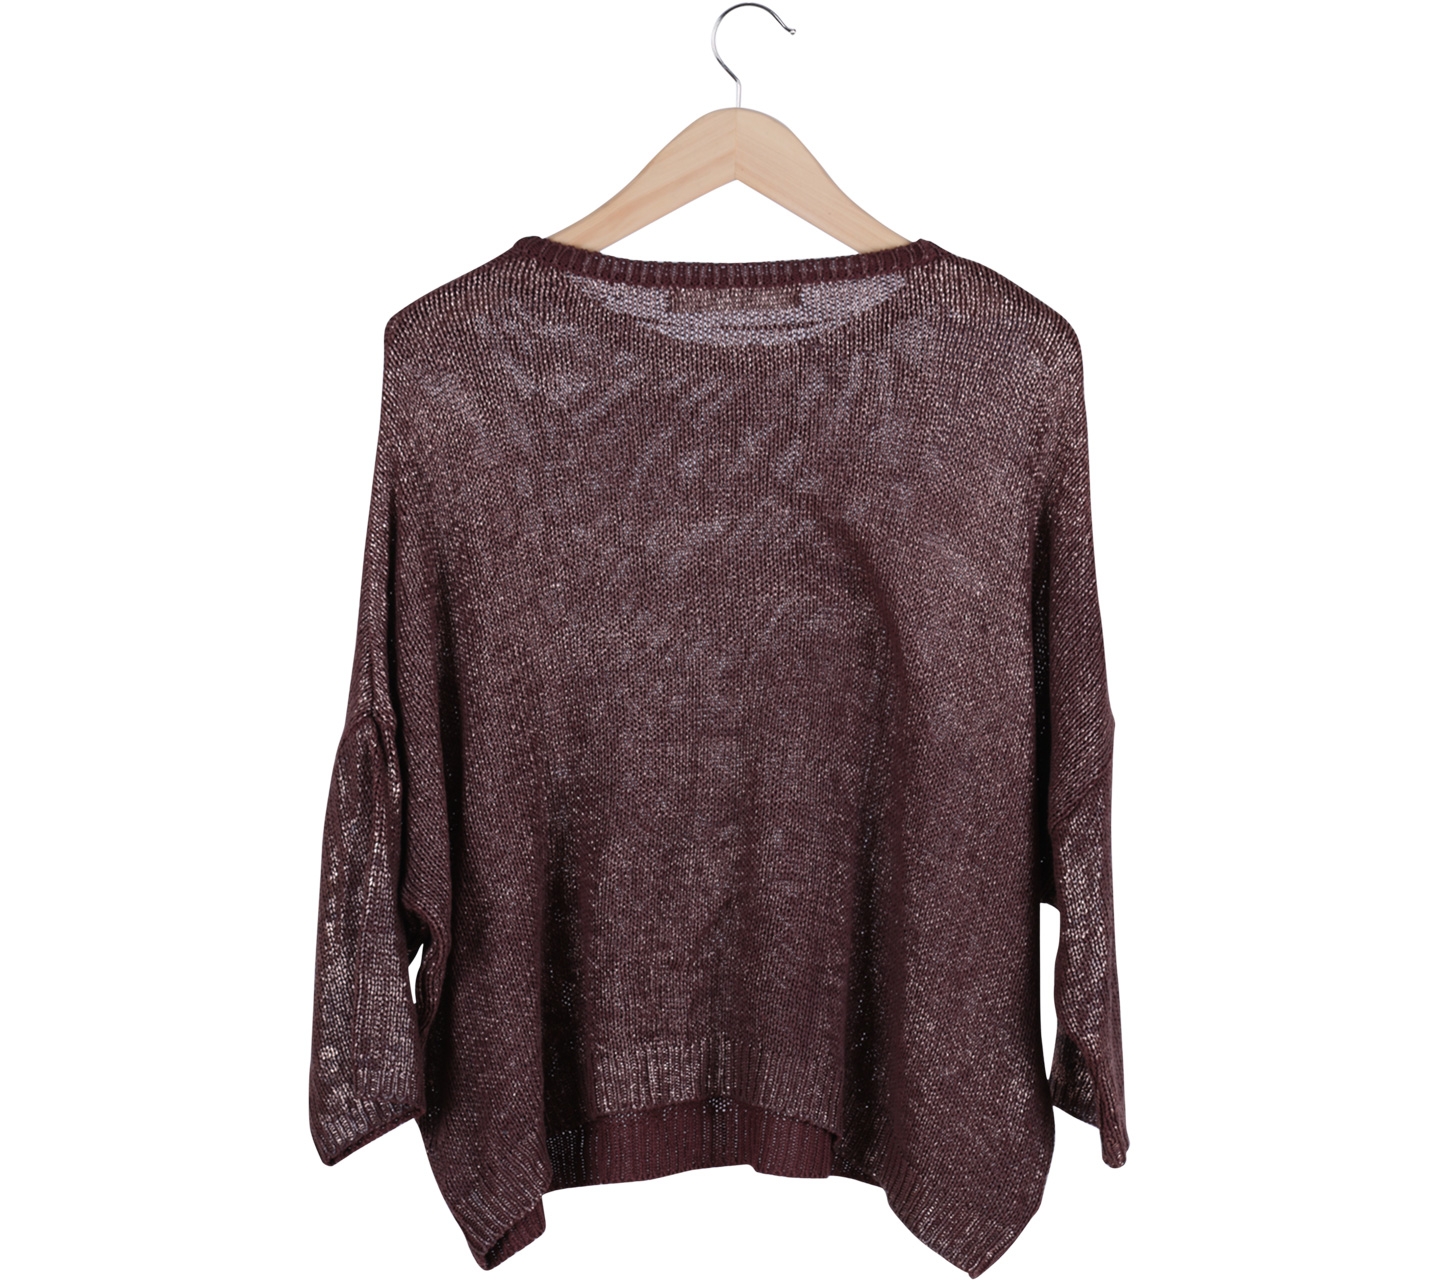 Zara Brown Shimmer Cable Knitted Sweater